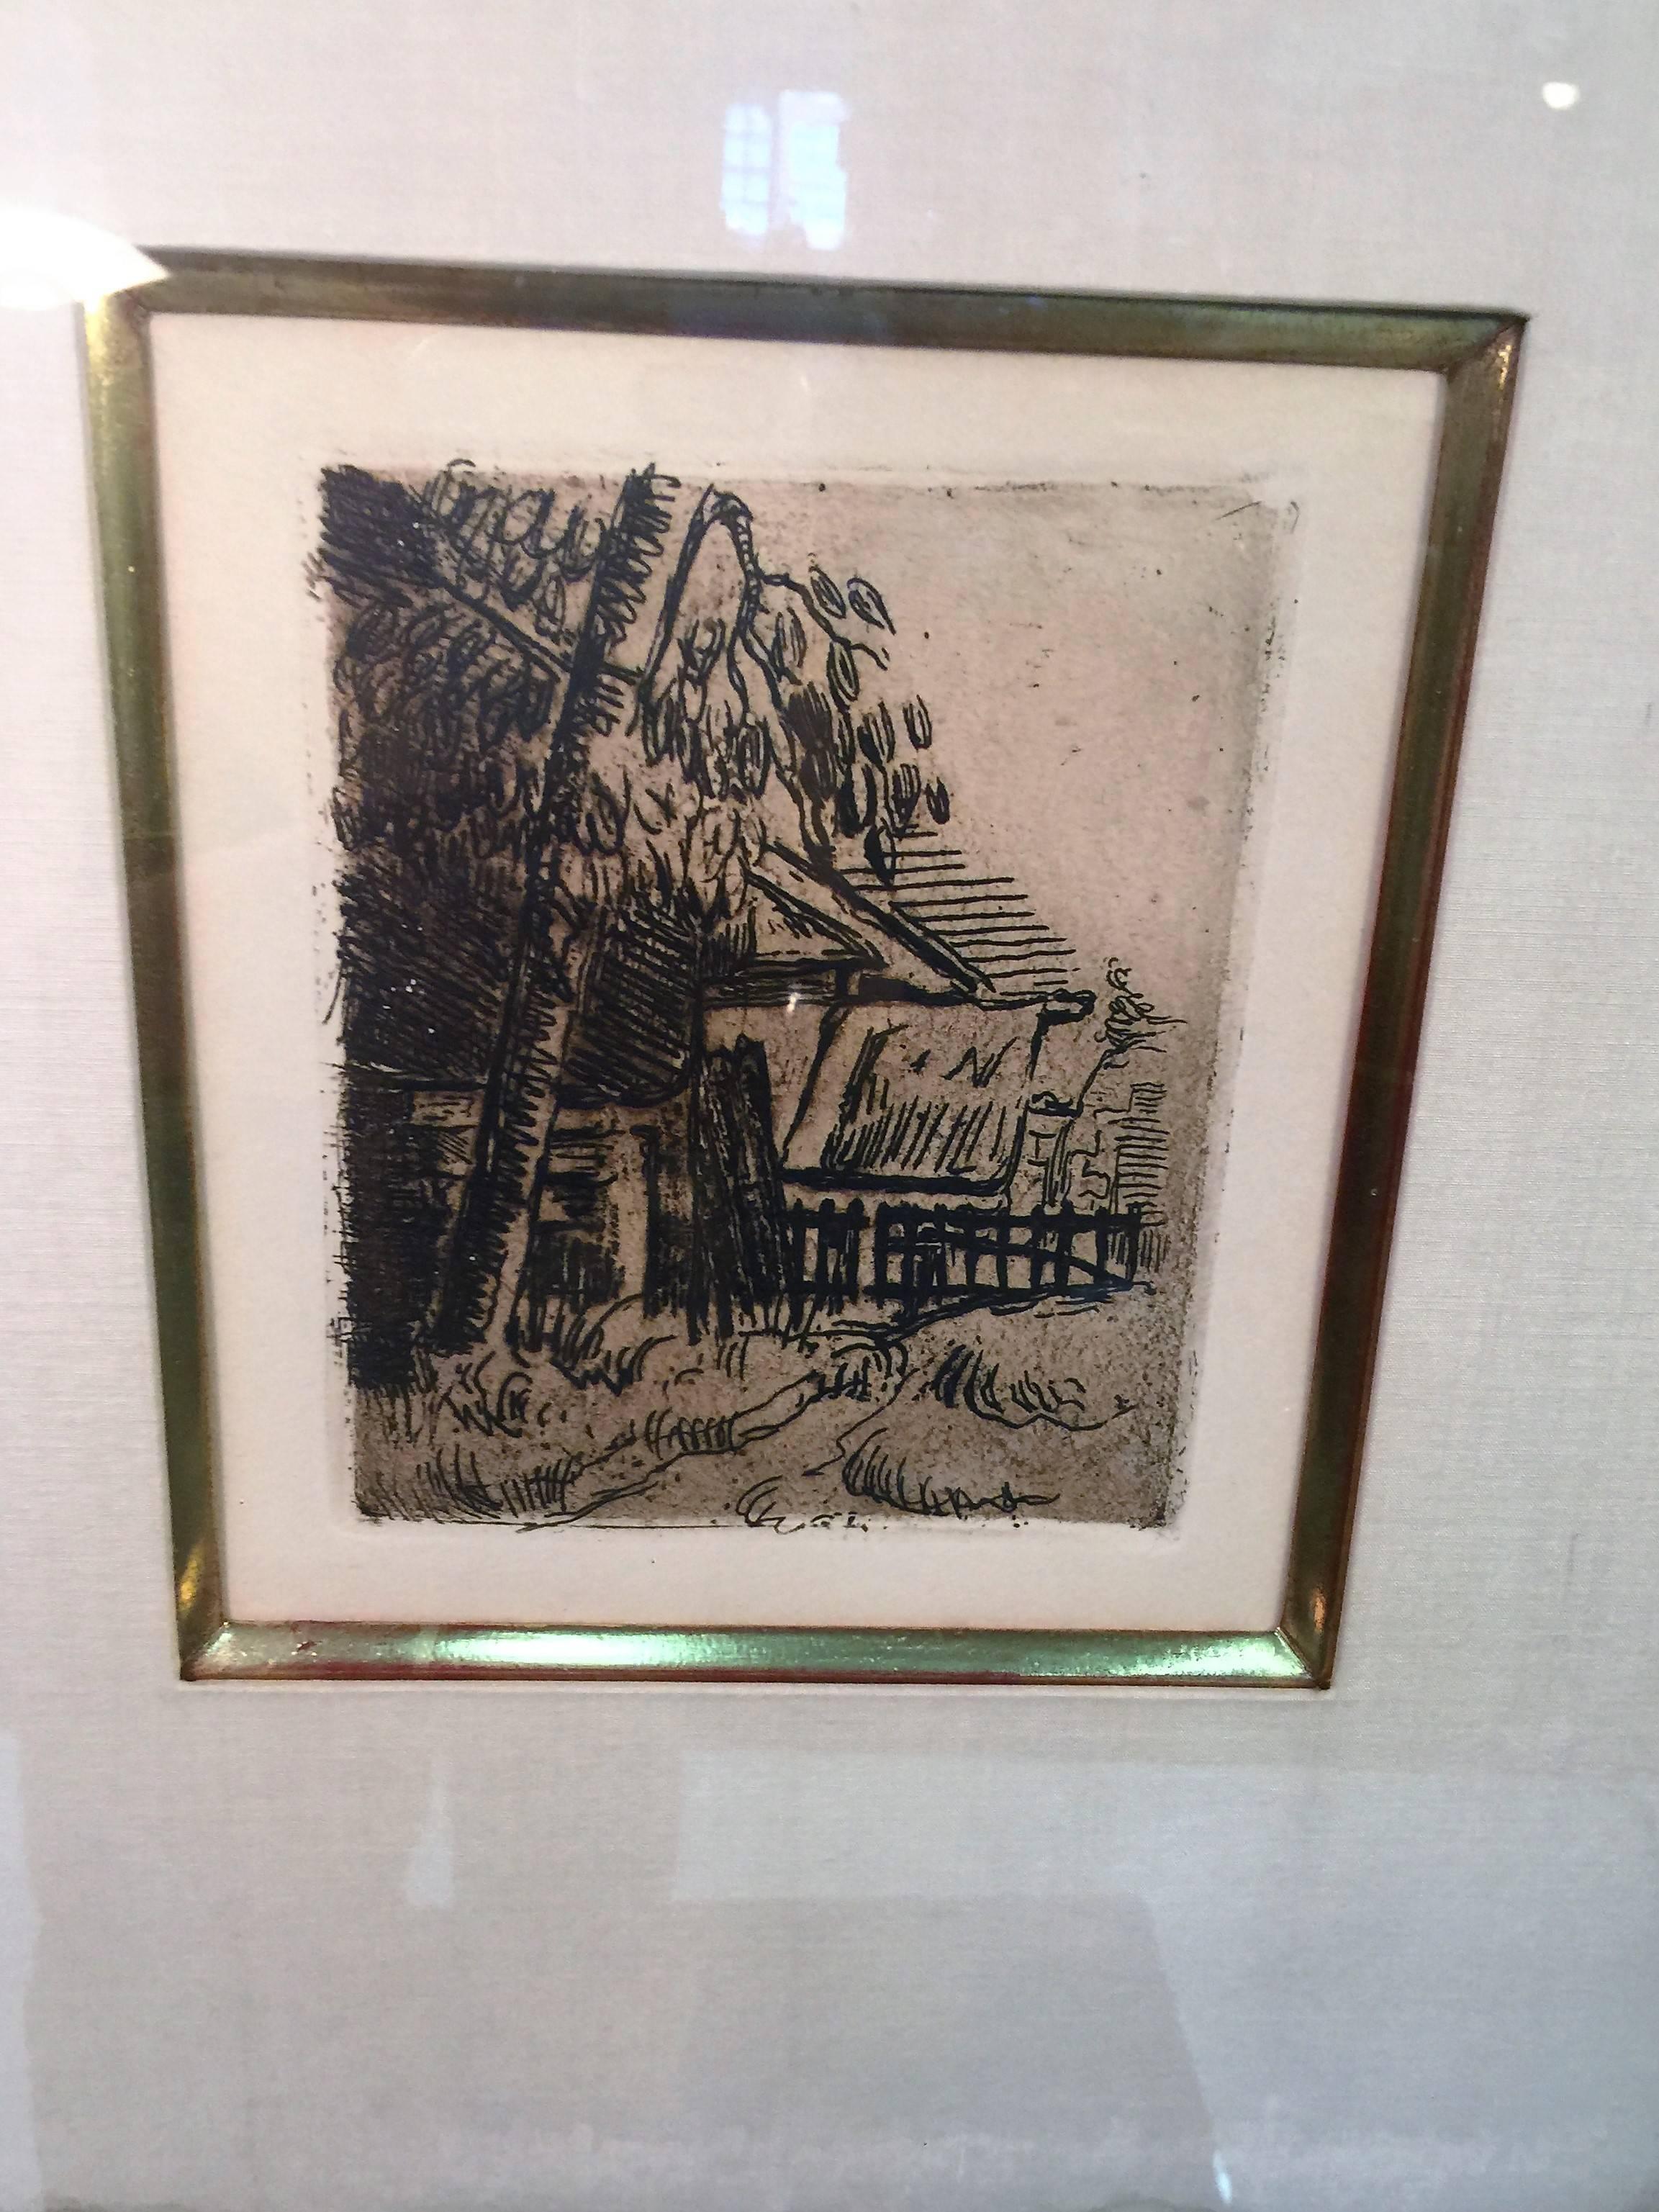 Original nice landscape etching in quality carved wood frame set within a gold leaf inner frame surrounded by a linen mat. Done by French artist Paul Cezanne (1839-1906). Out of a series of etchings, circa 1914 for ‘homage to Cezanne', the original